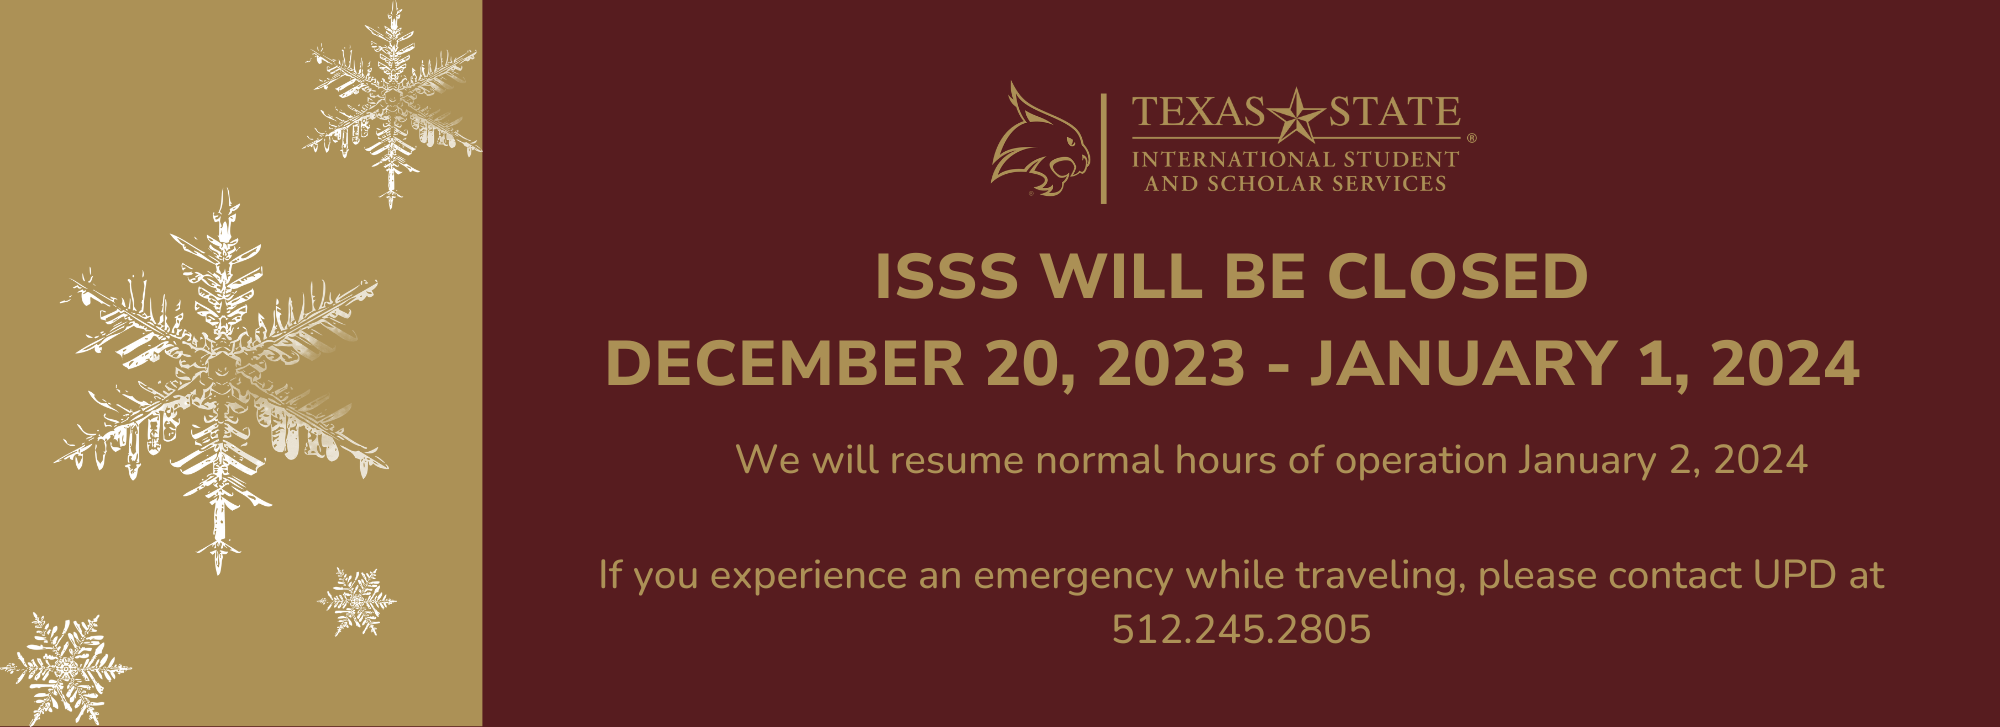 International Student and Scholar Services (ISSS) Texas State University